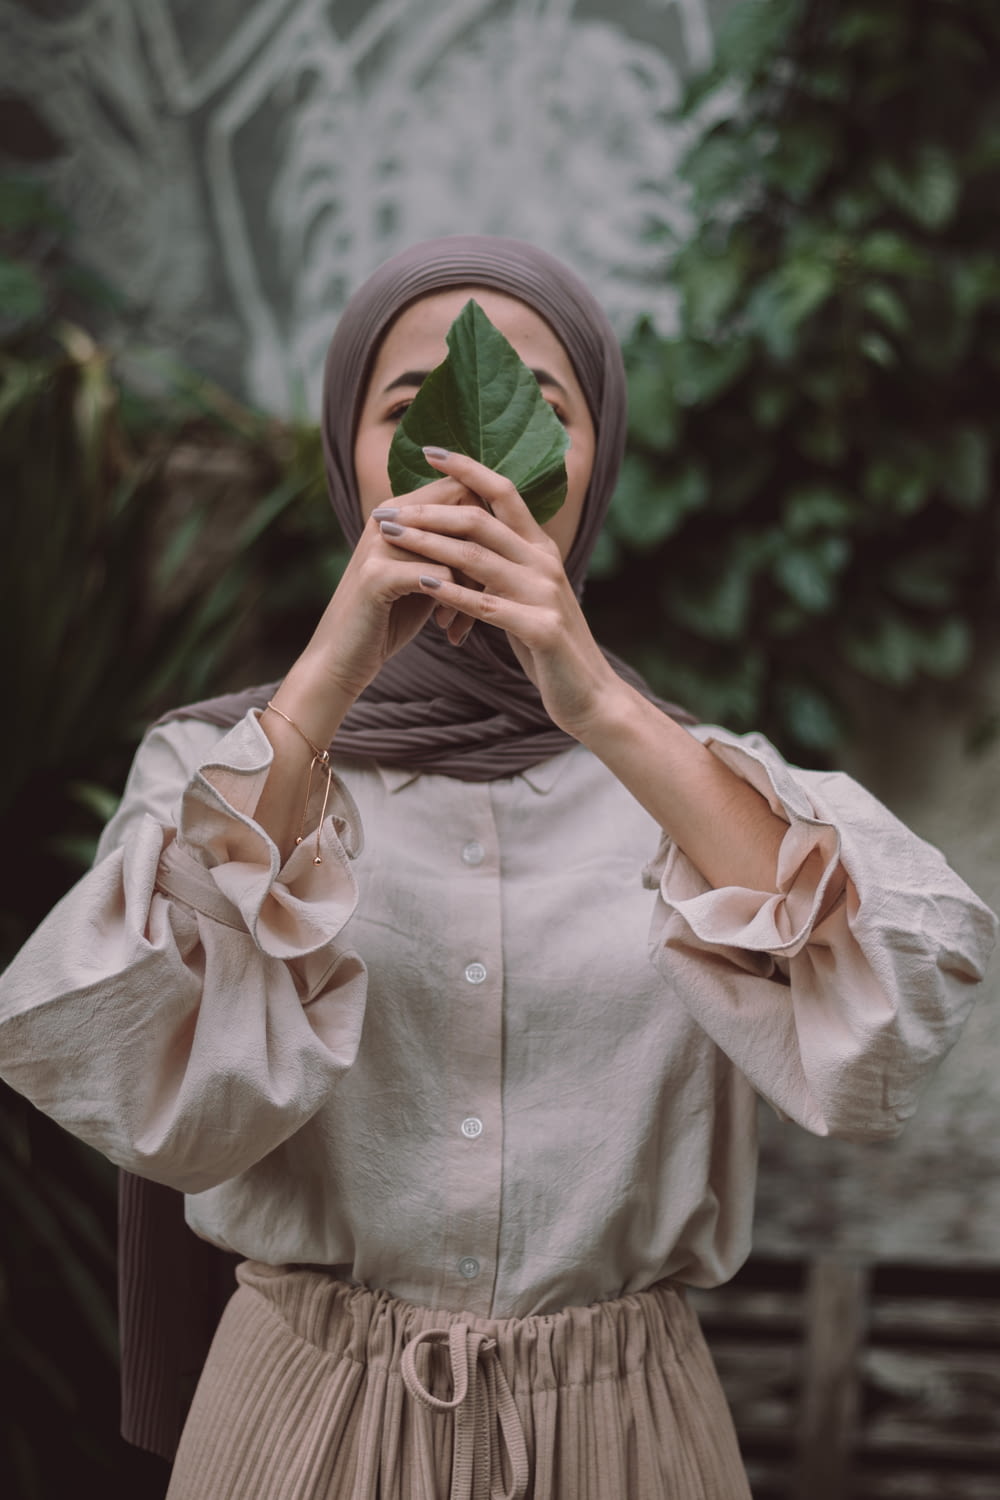 woman in white button up shirt covering her face with white and green textile